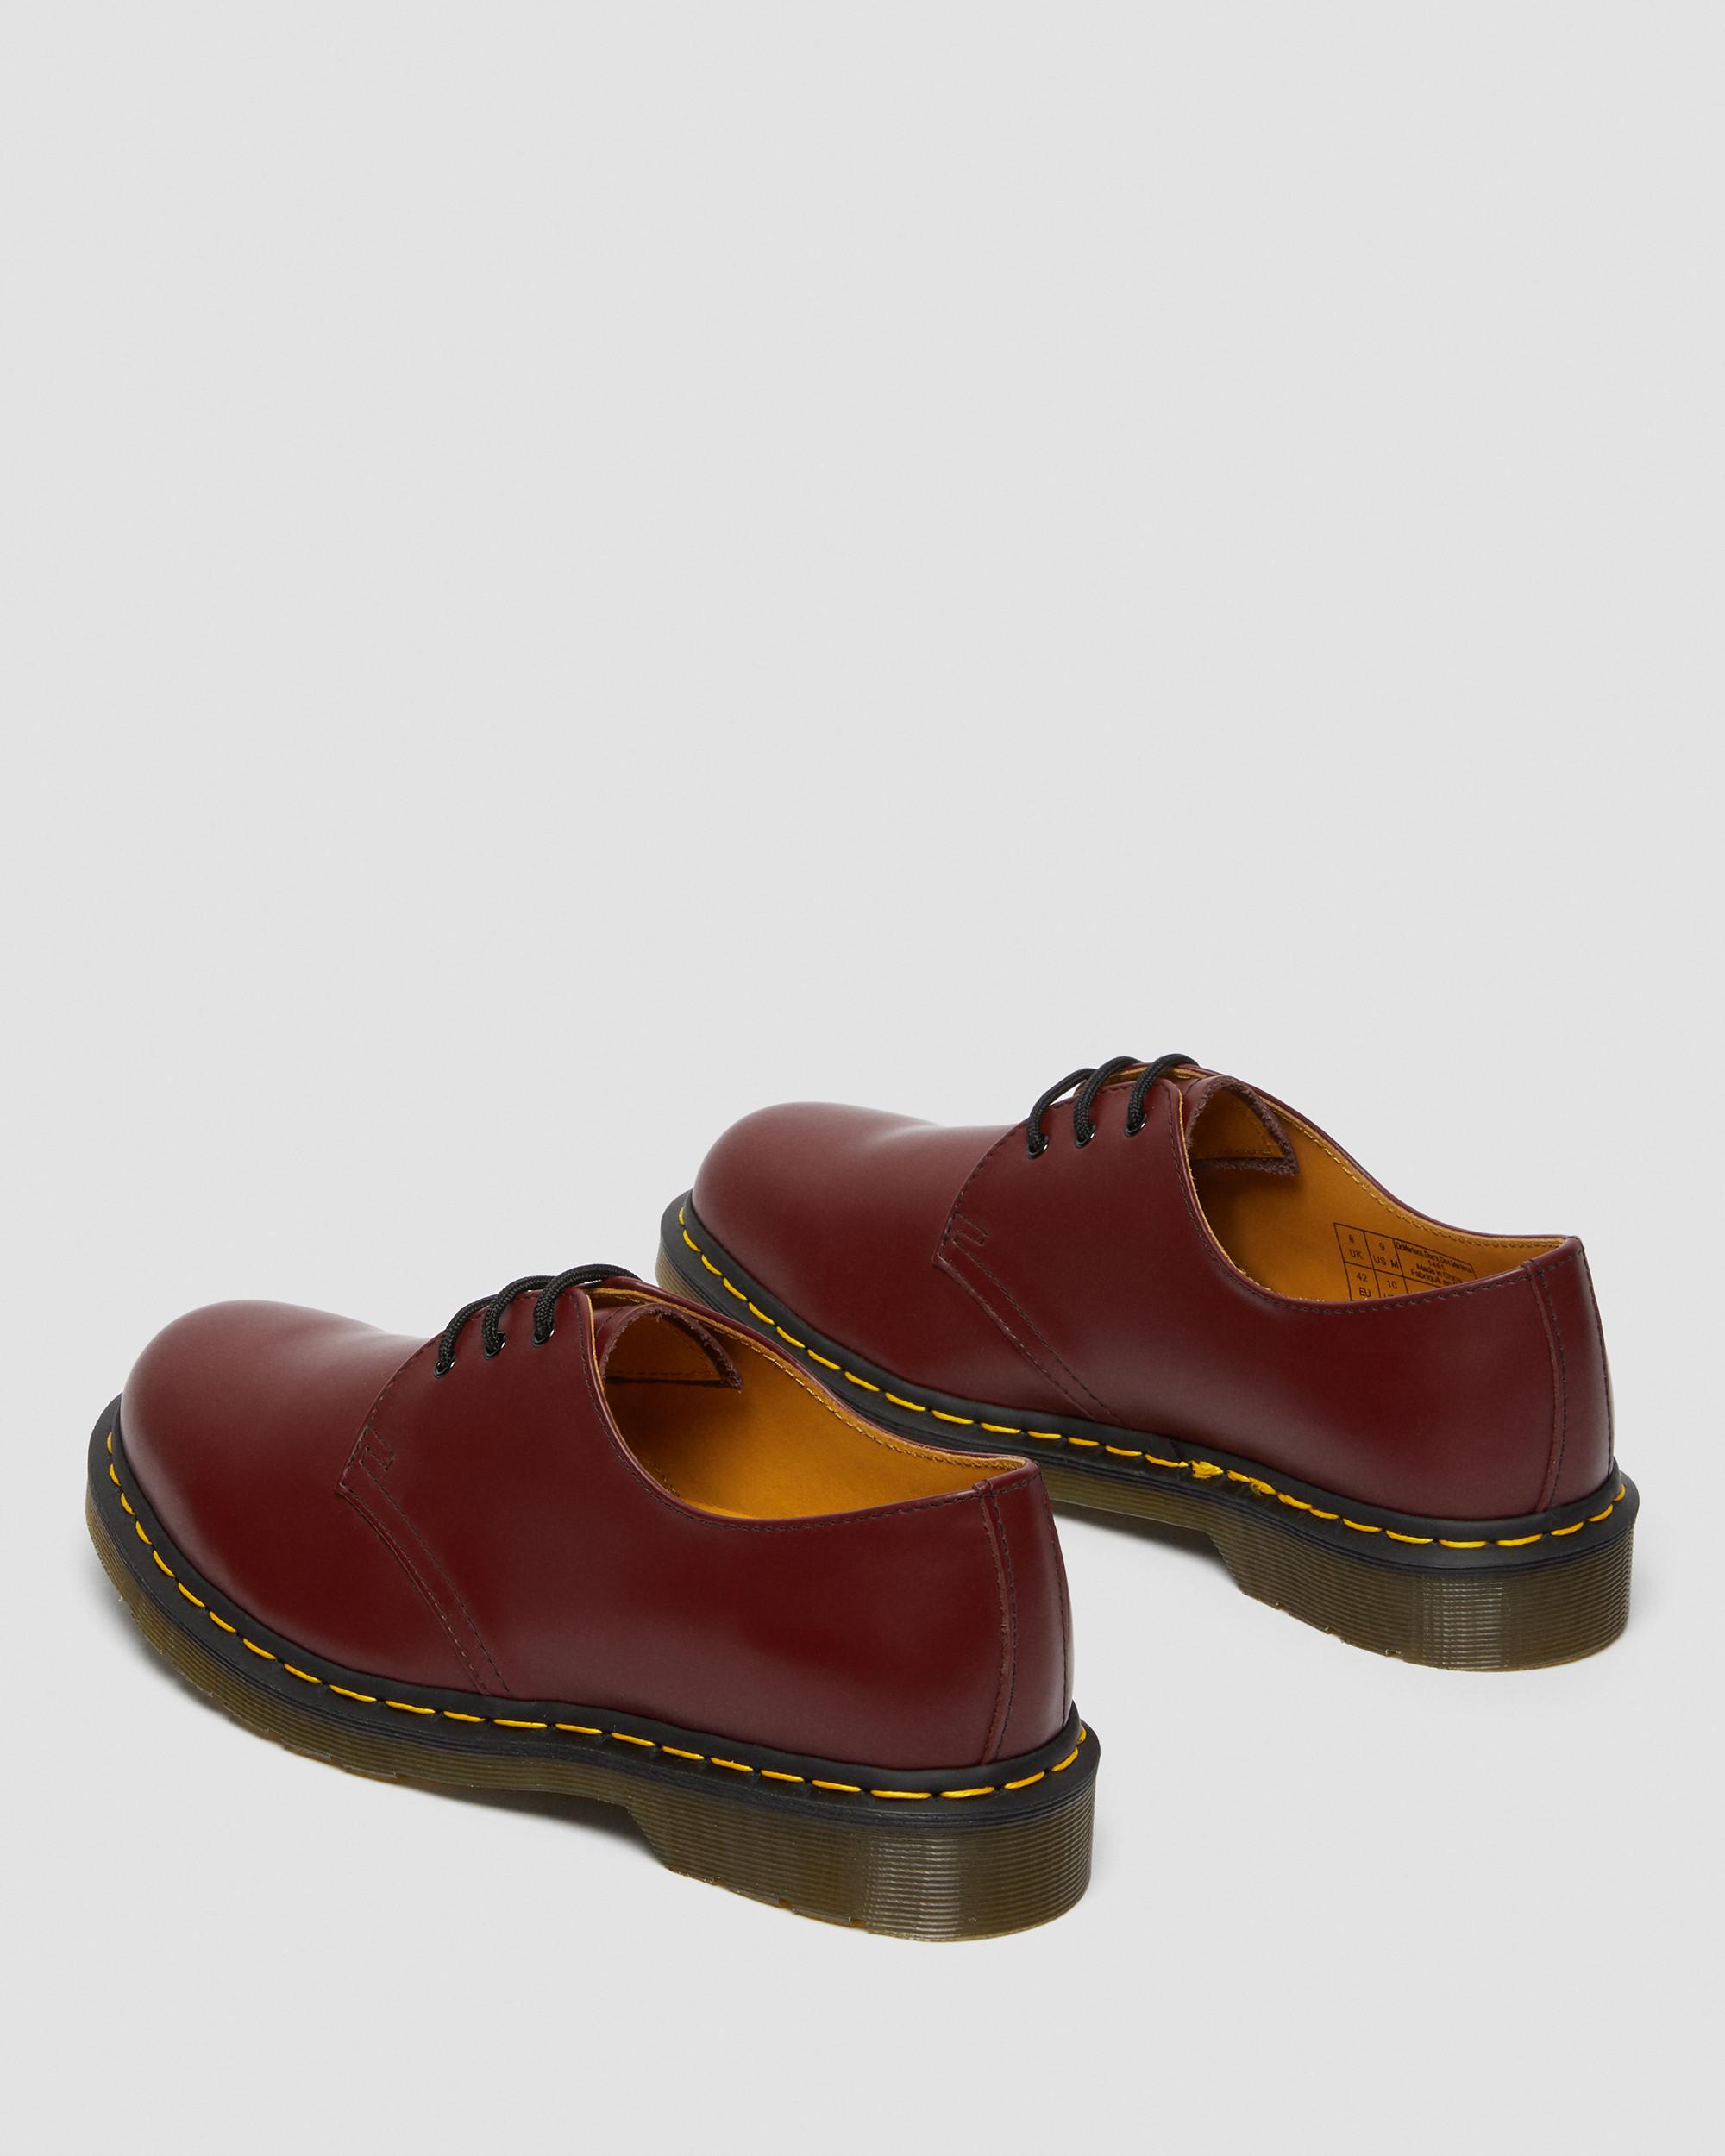 1461 Smooth Leather Oxford ShoesNahkaiset 1461 Smooth Oxford -kengät Dr. Martens